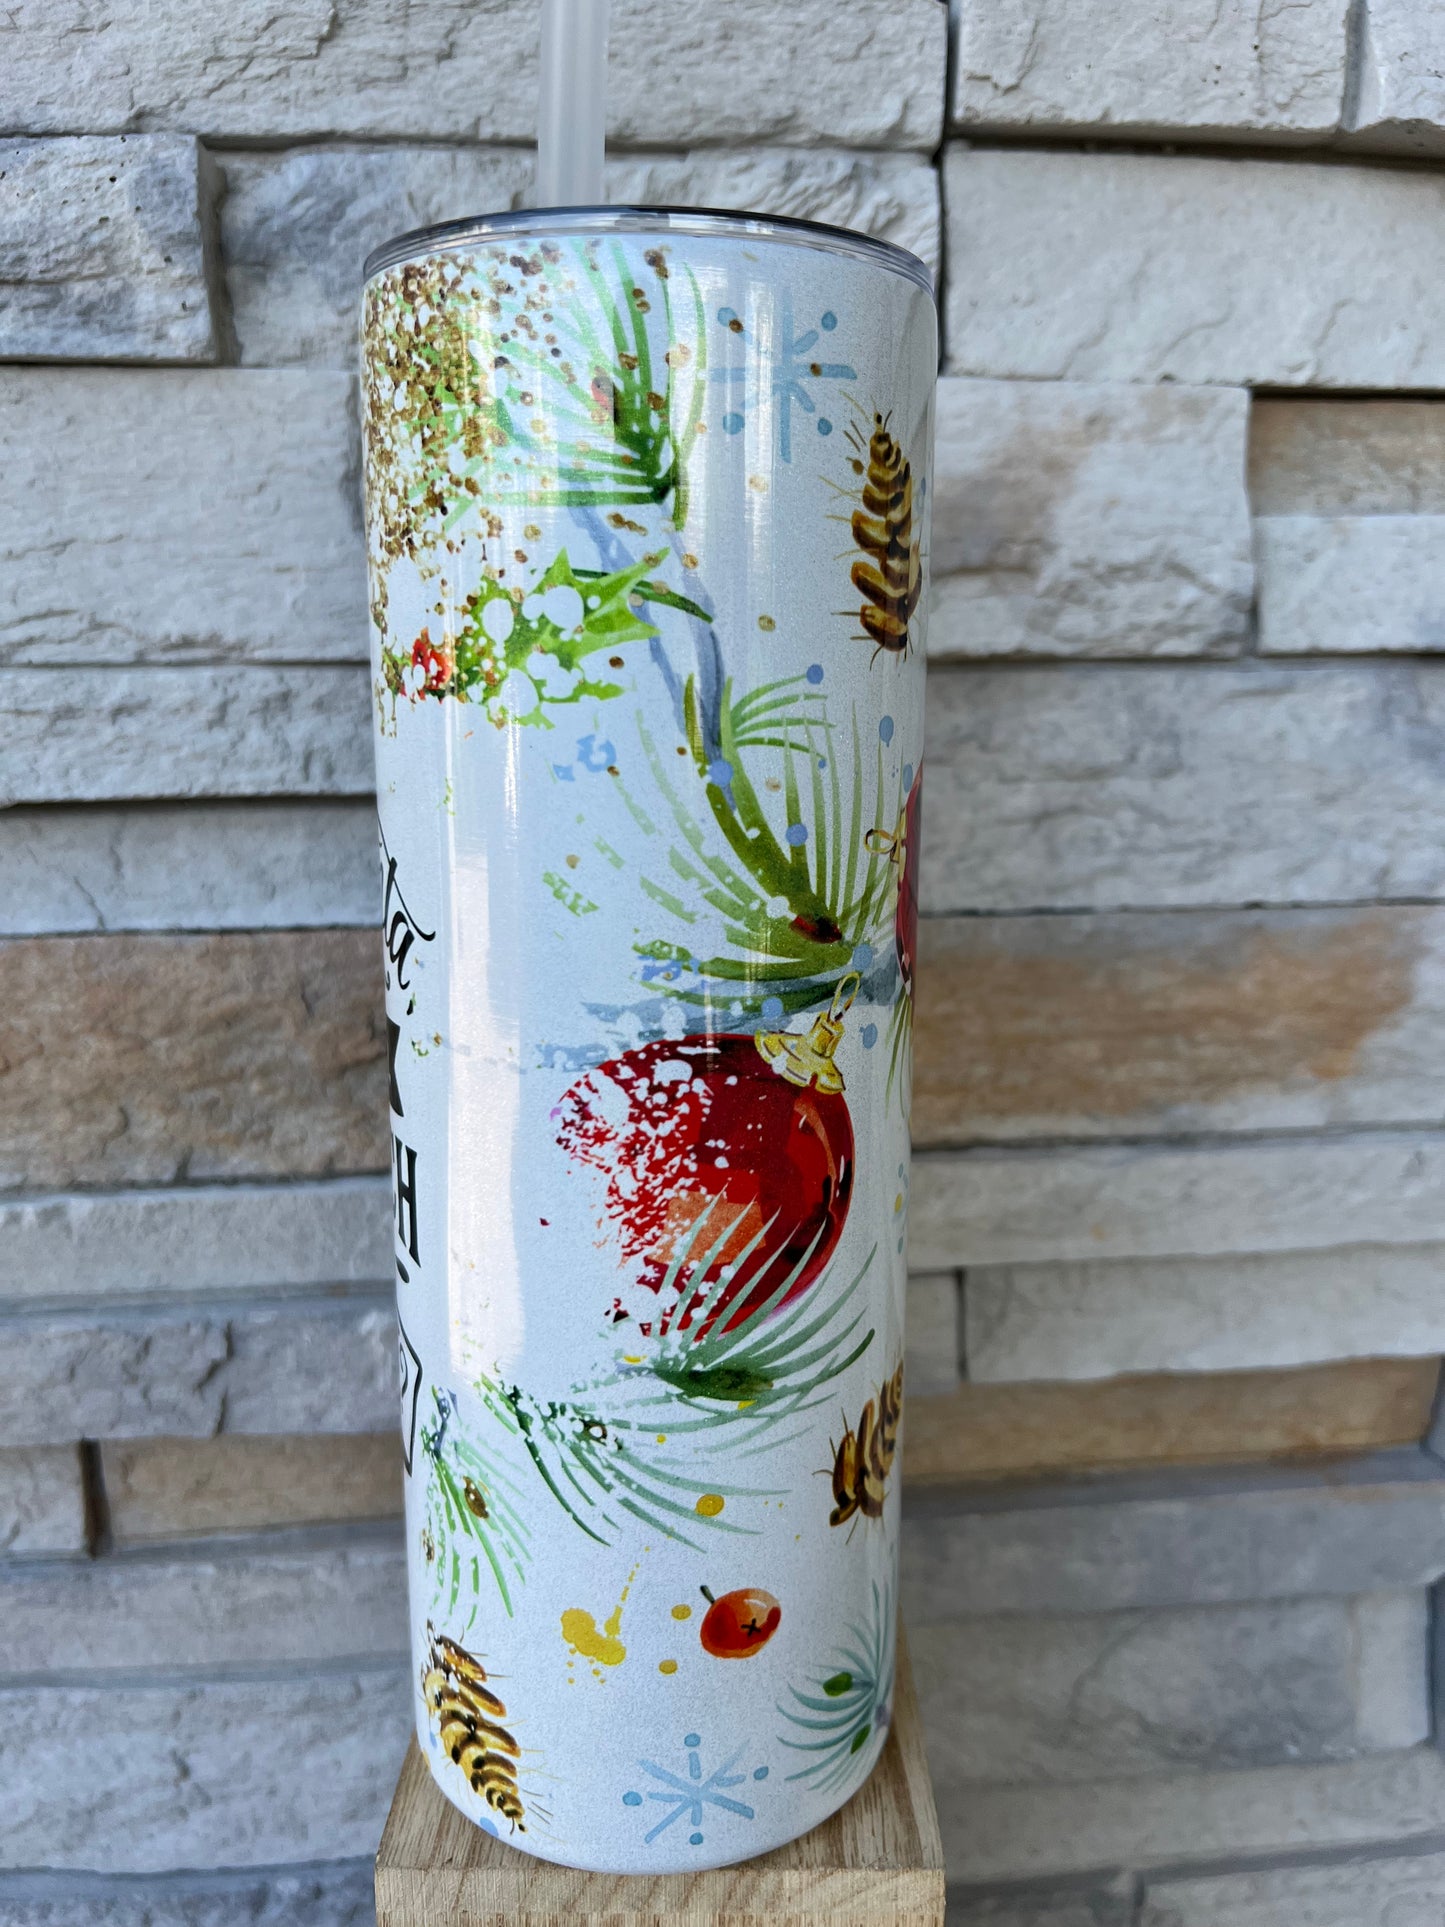 Santa, How Much Do You Already Know? Christmas Shimmer 20oz Skinny Tumbler